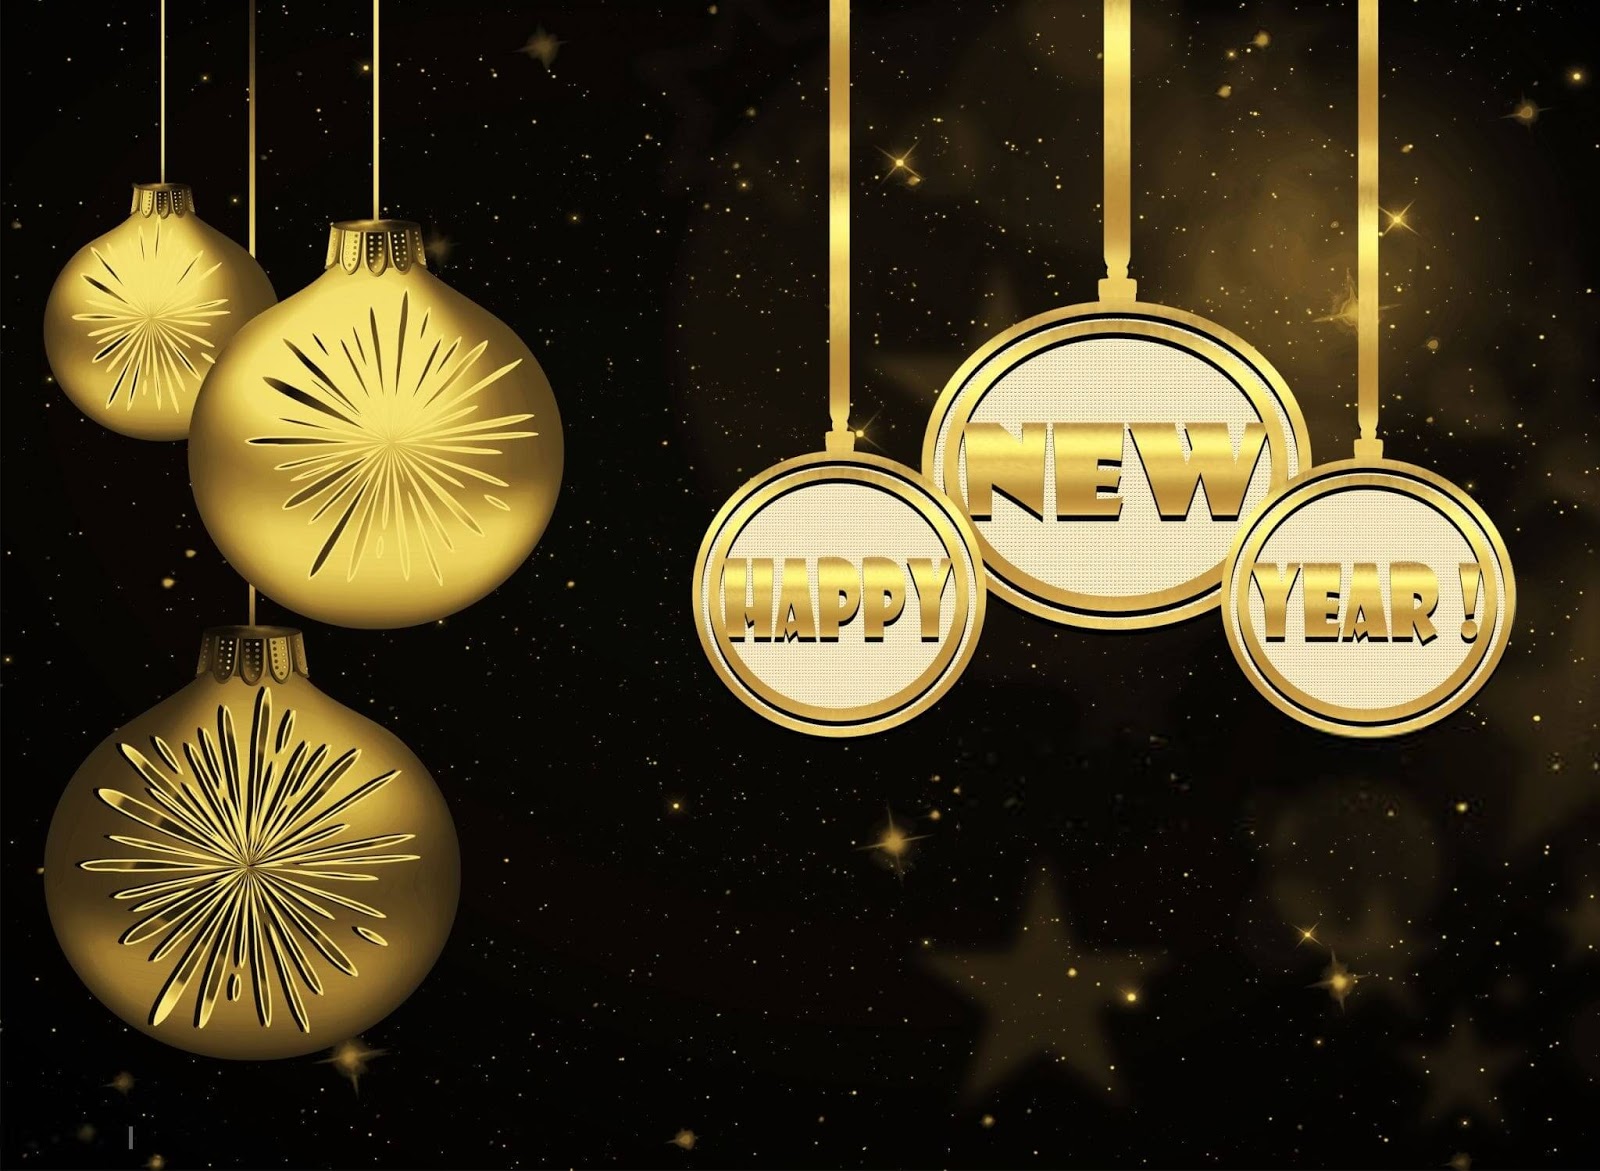 Free Happy New Year Images Download